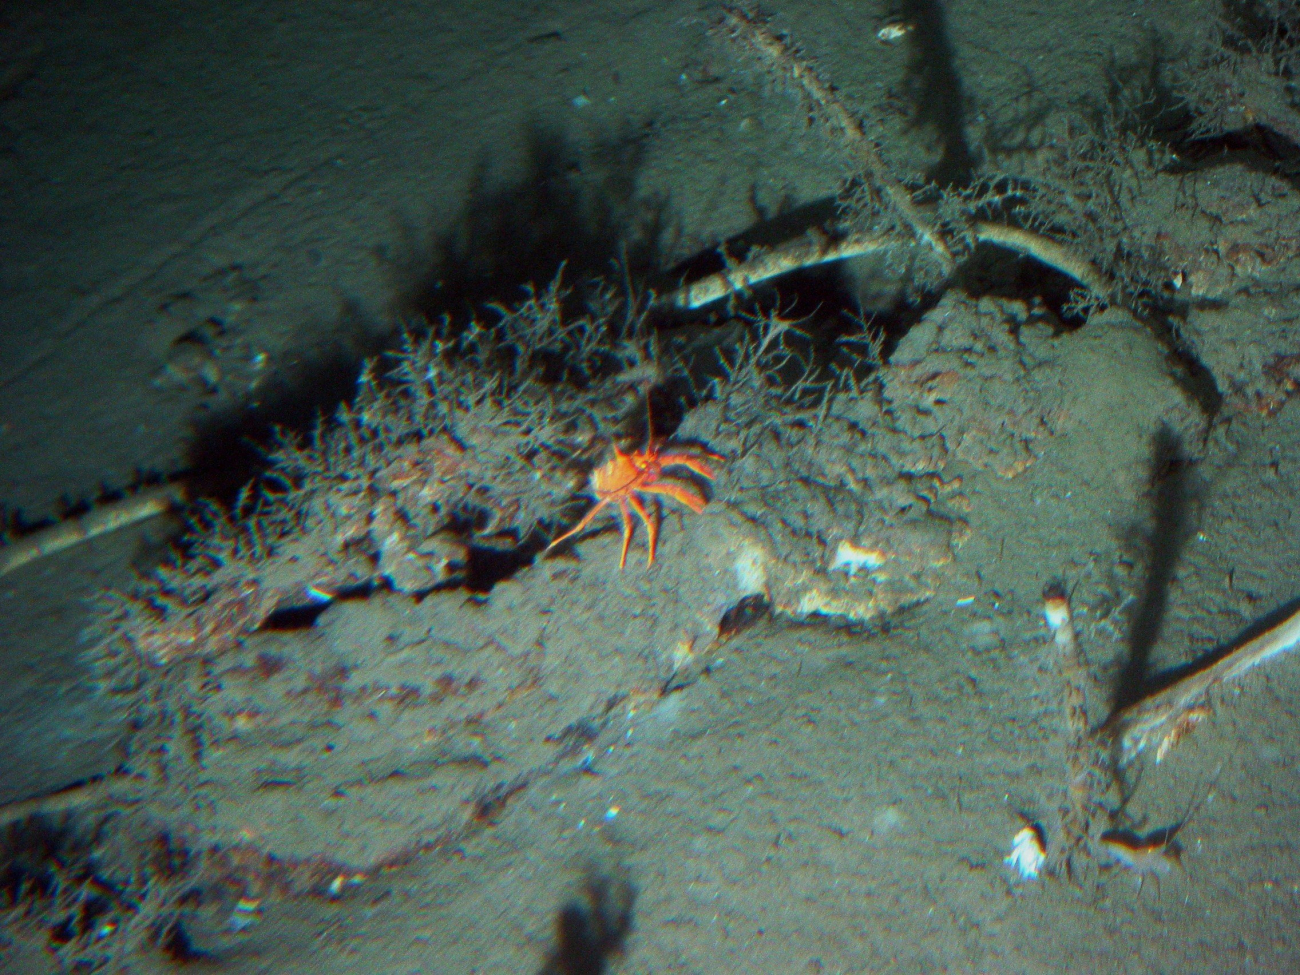 A small orange crab near a few scattered tube worm individuals at 2180 metersdepth in Atwater Valley